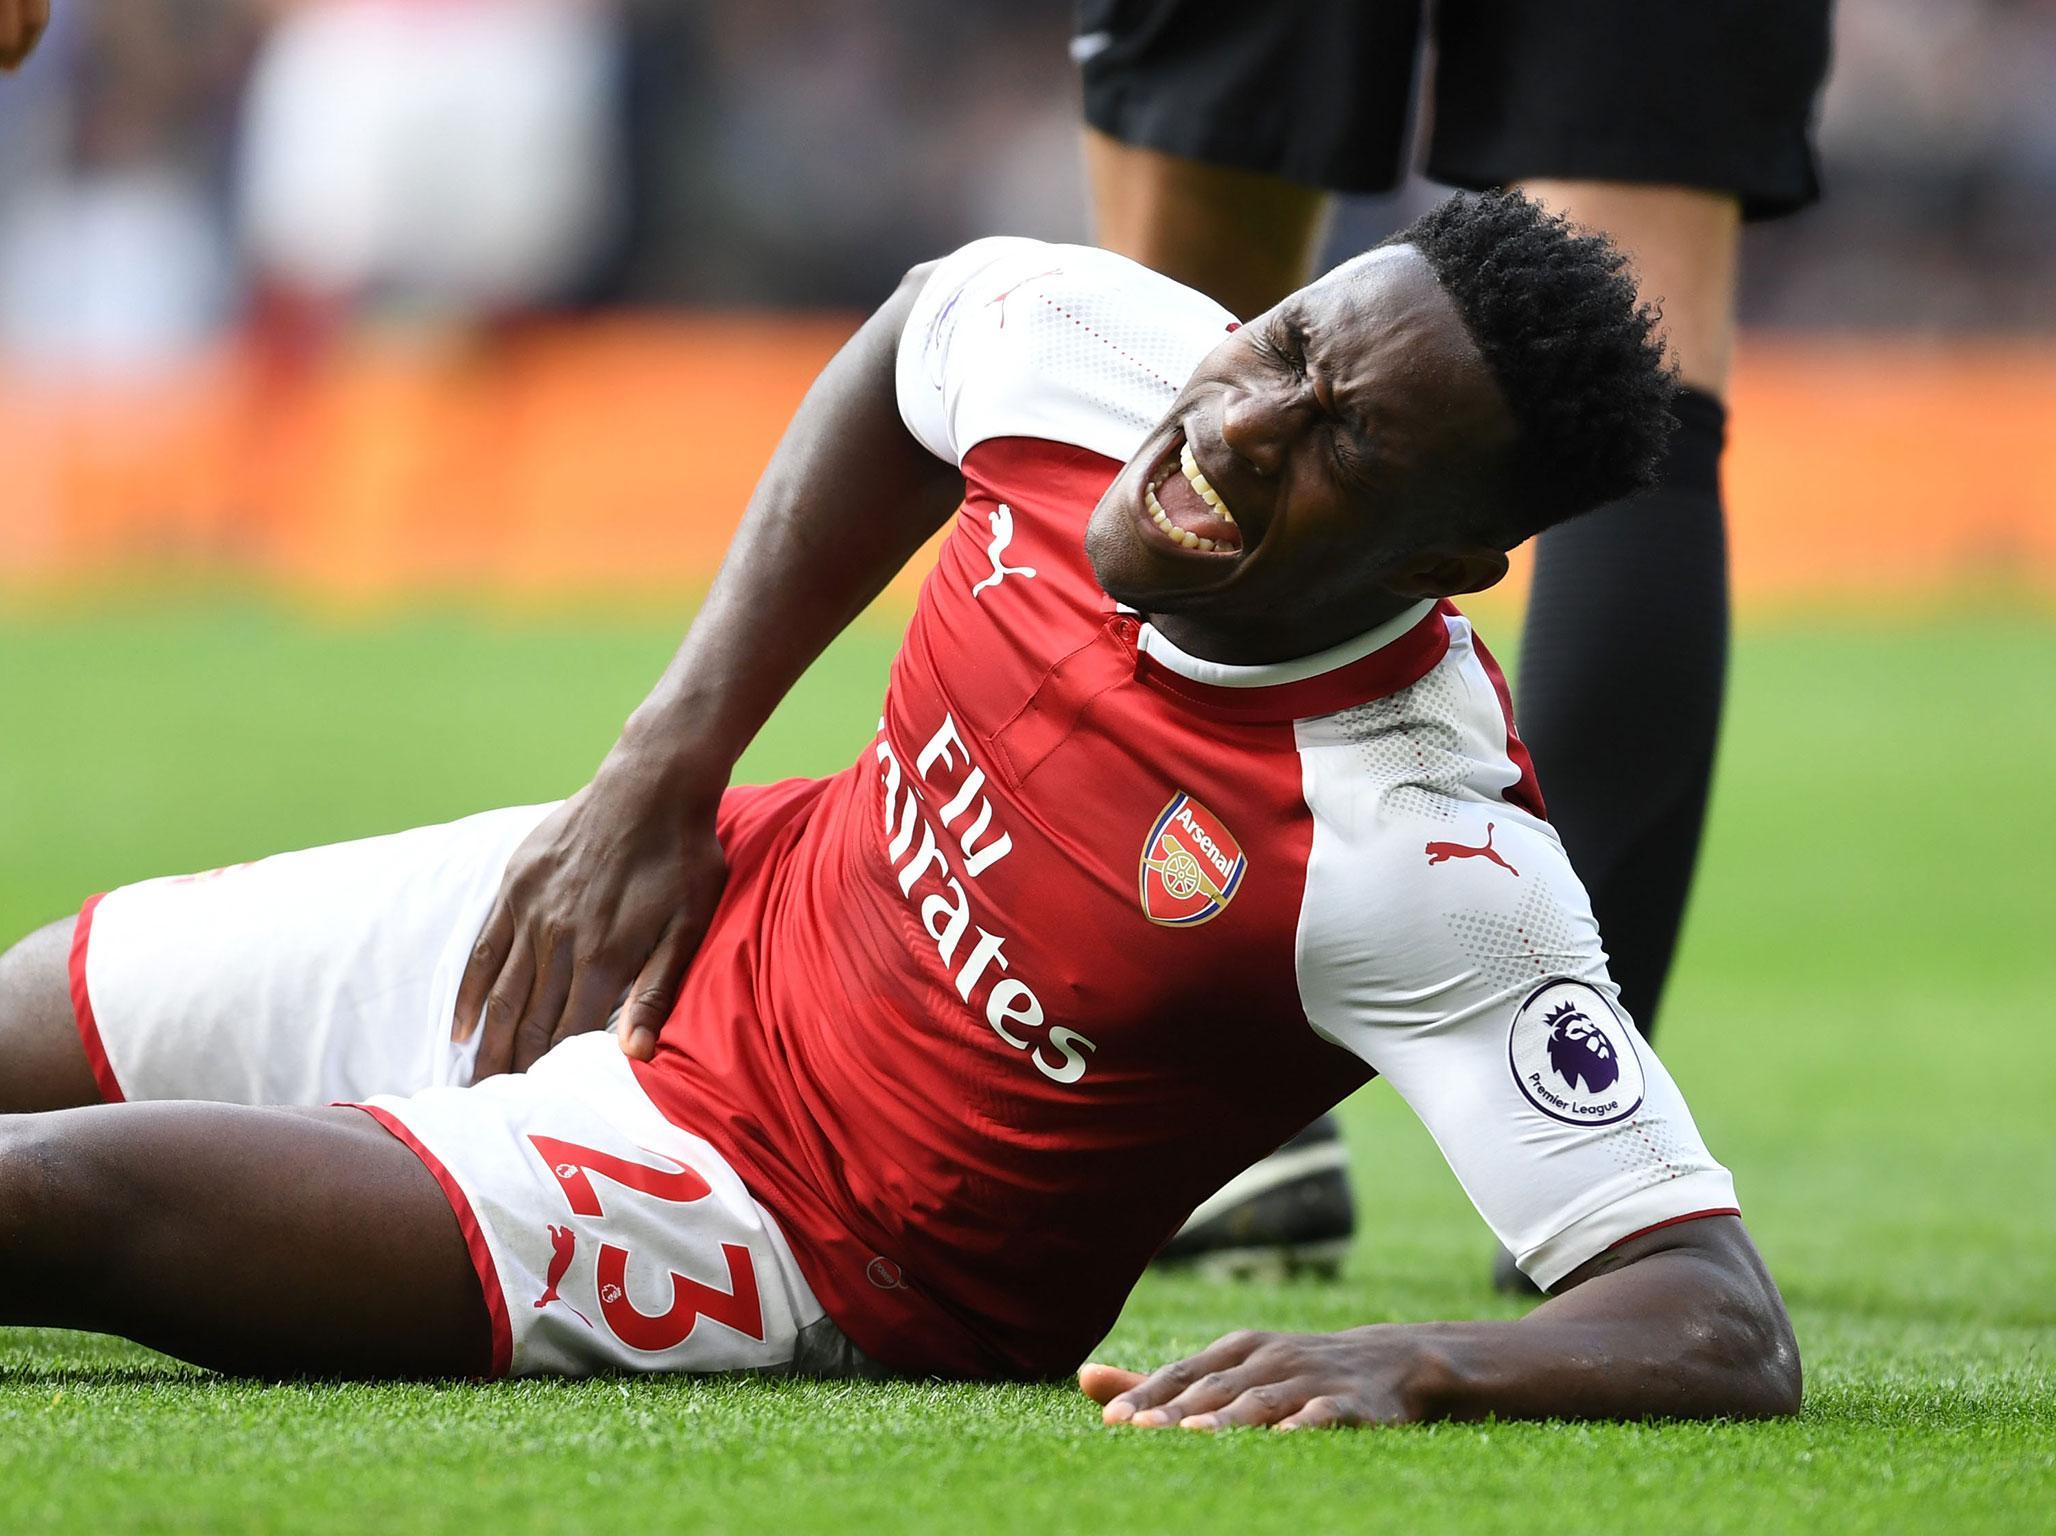 Danny Welbeck will be sidelined for a month with a groin injury